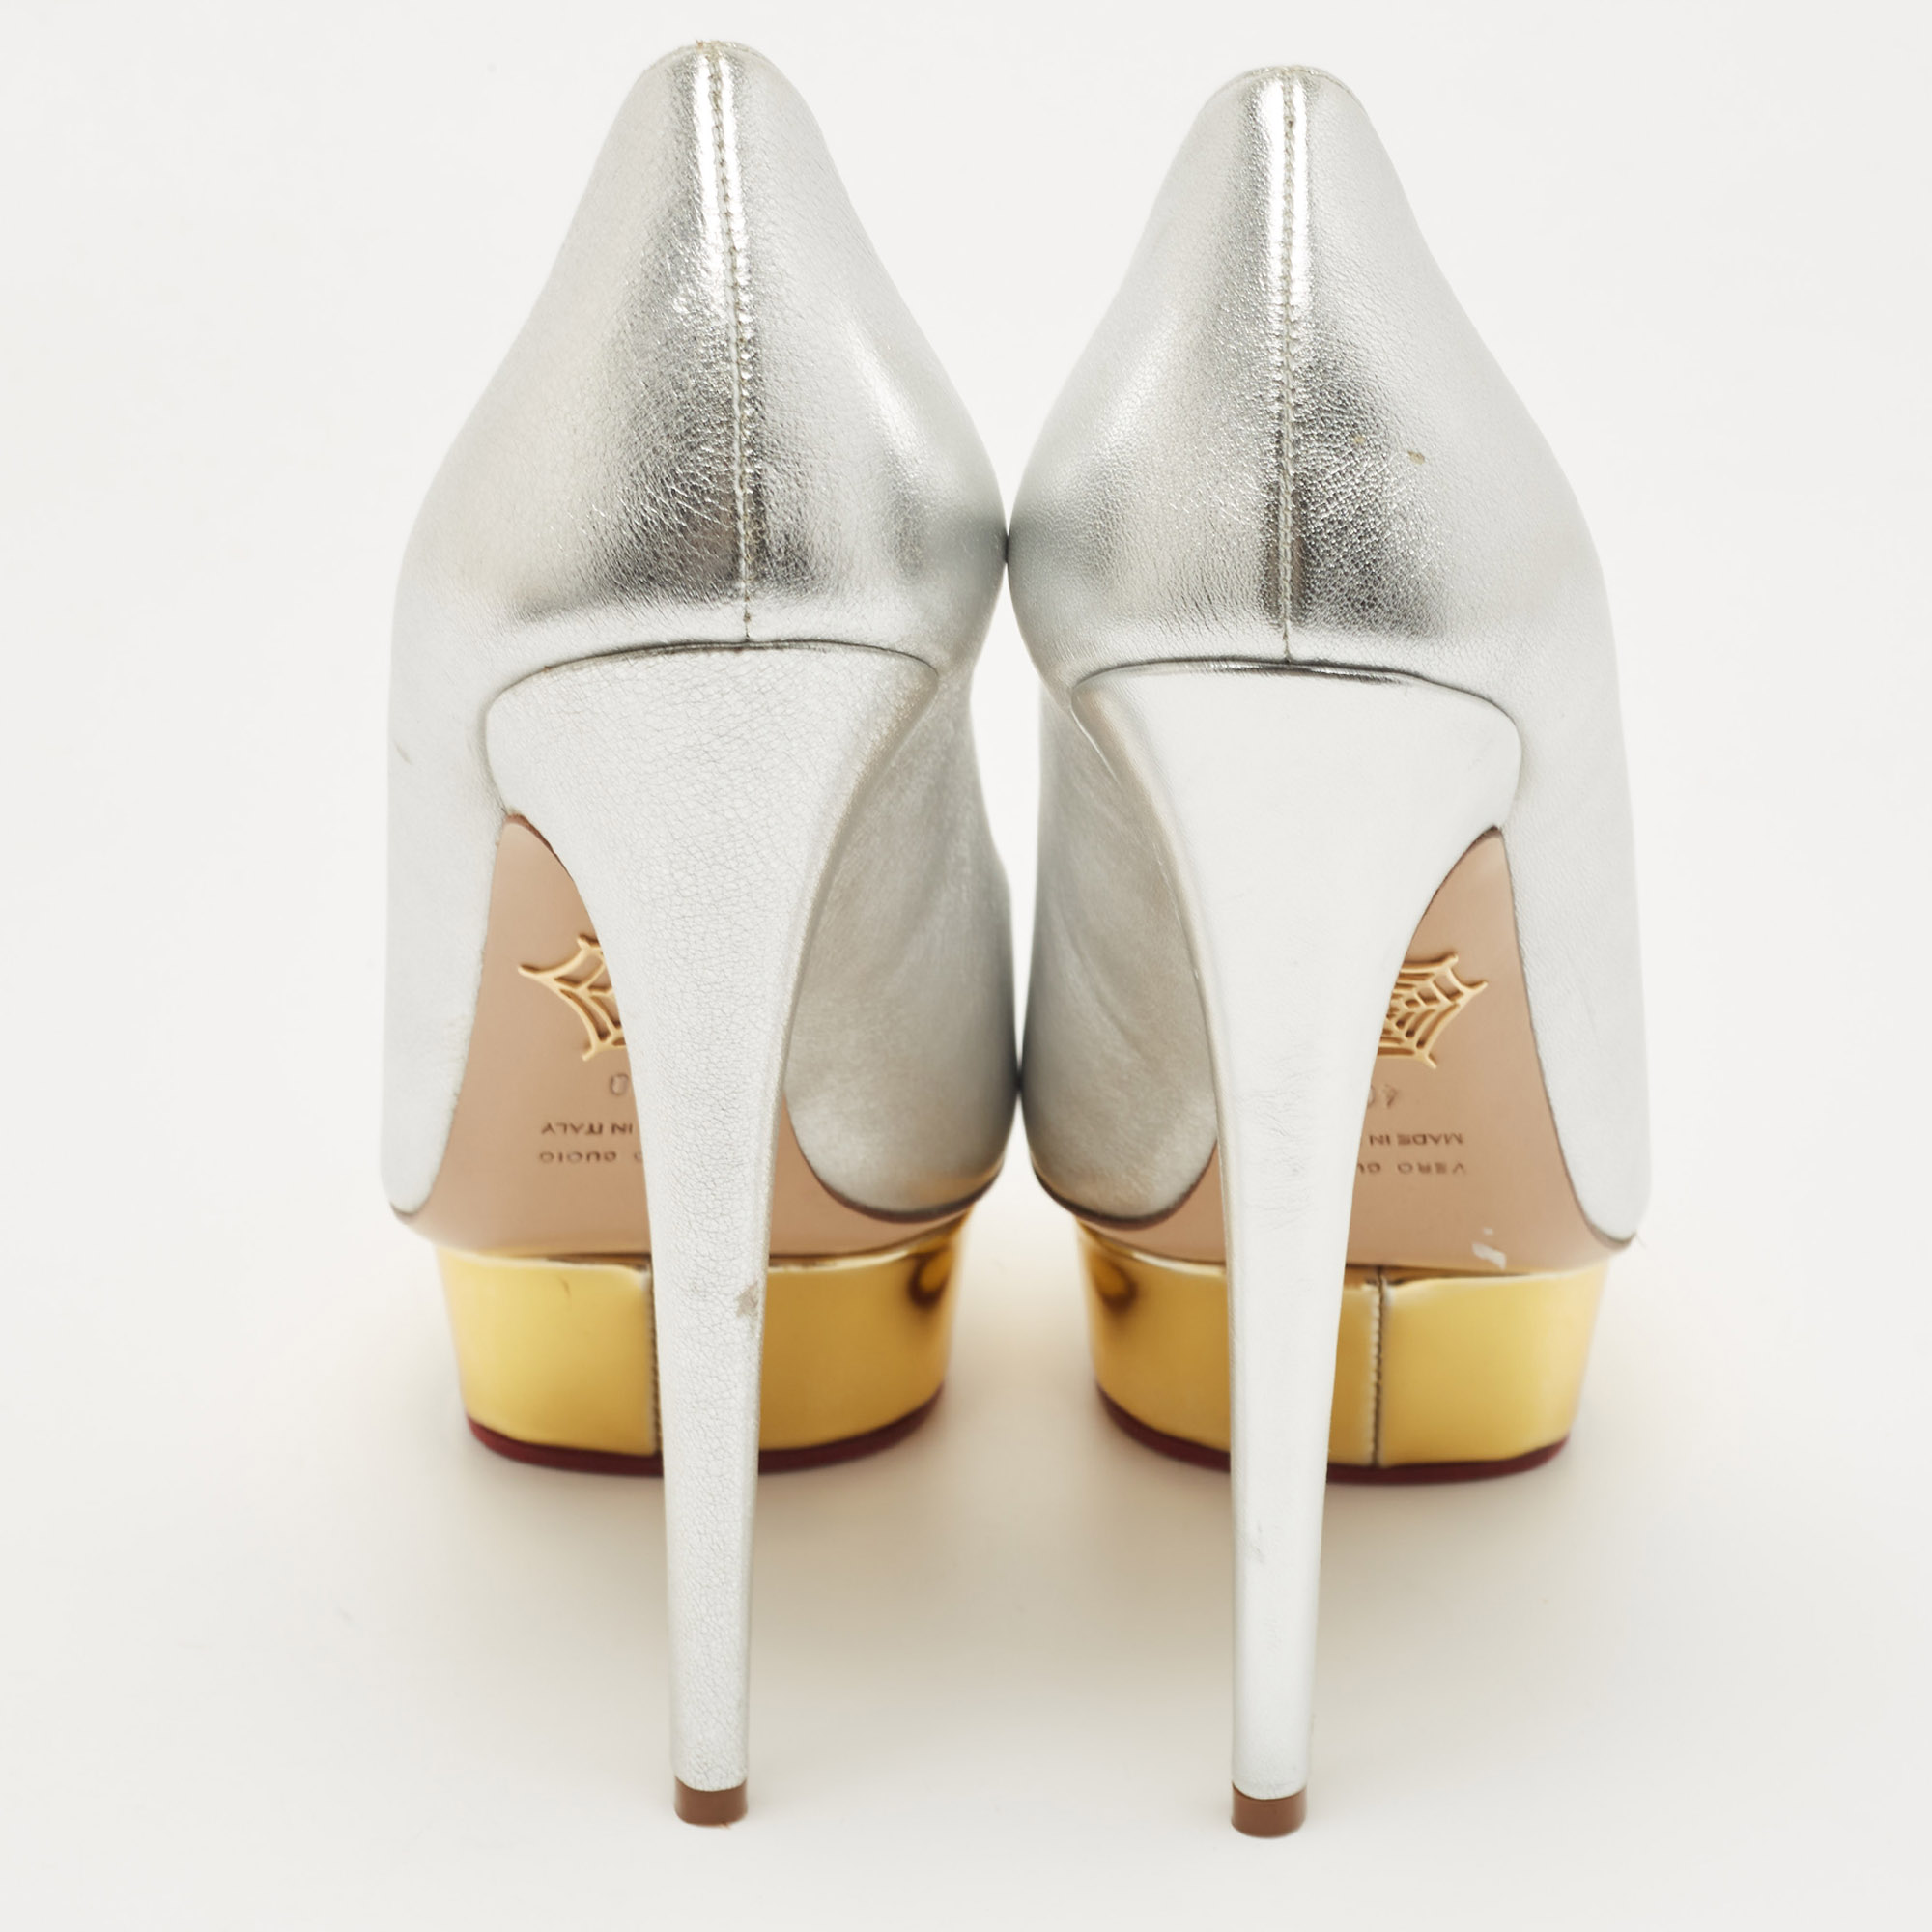 Charlotte Olympia Silver Leather Dolly Pumps Size 40